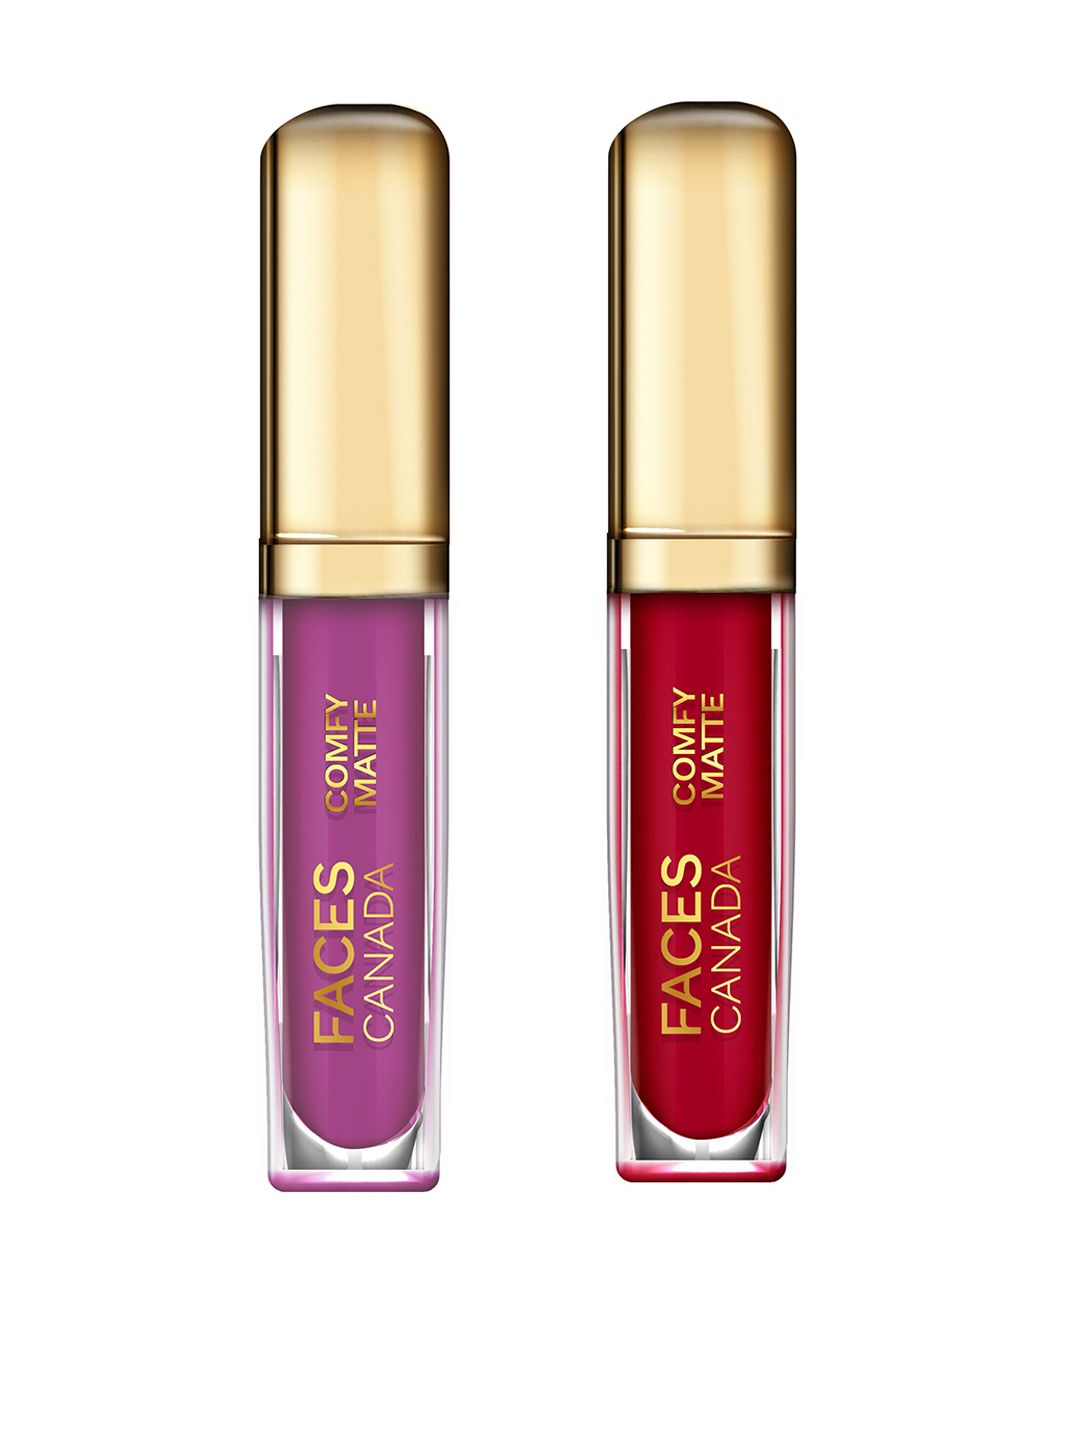 FACES CANADA Set of 2 Comfy Matte Lip Colors - Getting Ready 02 & End Of Story 03 Price in India